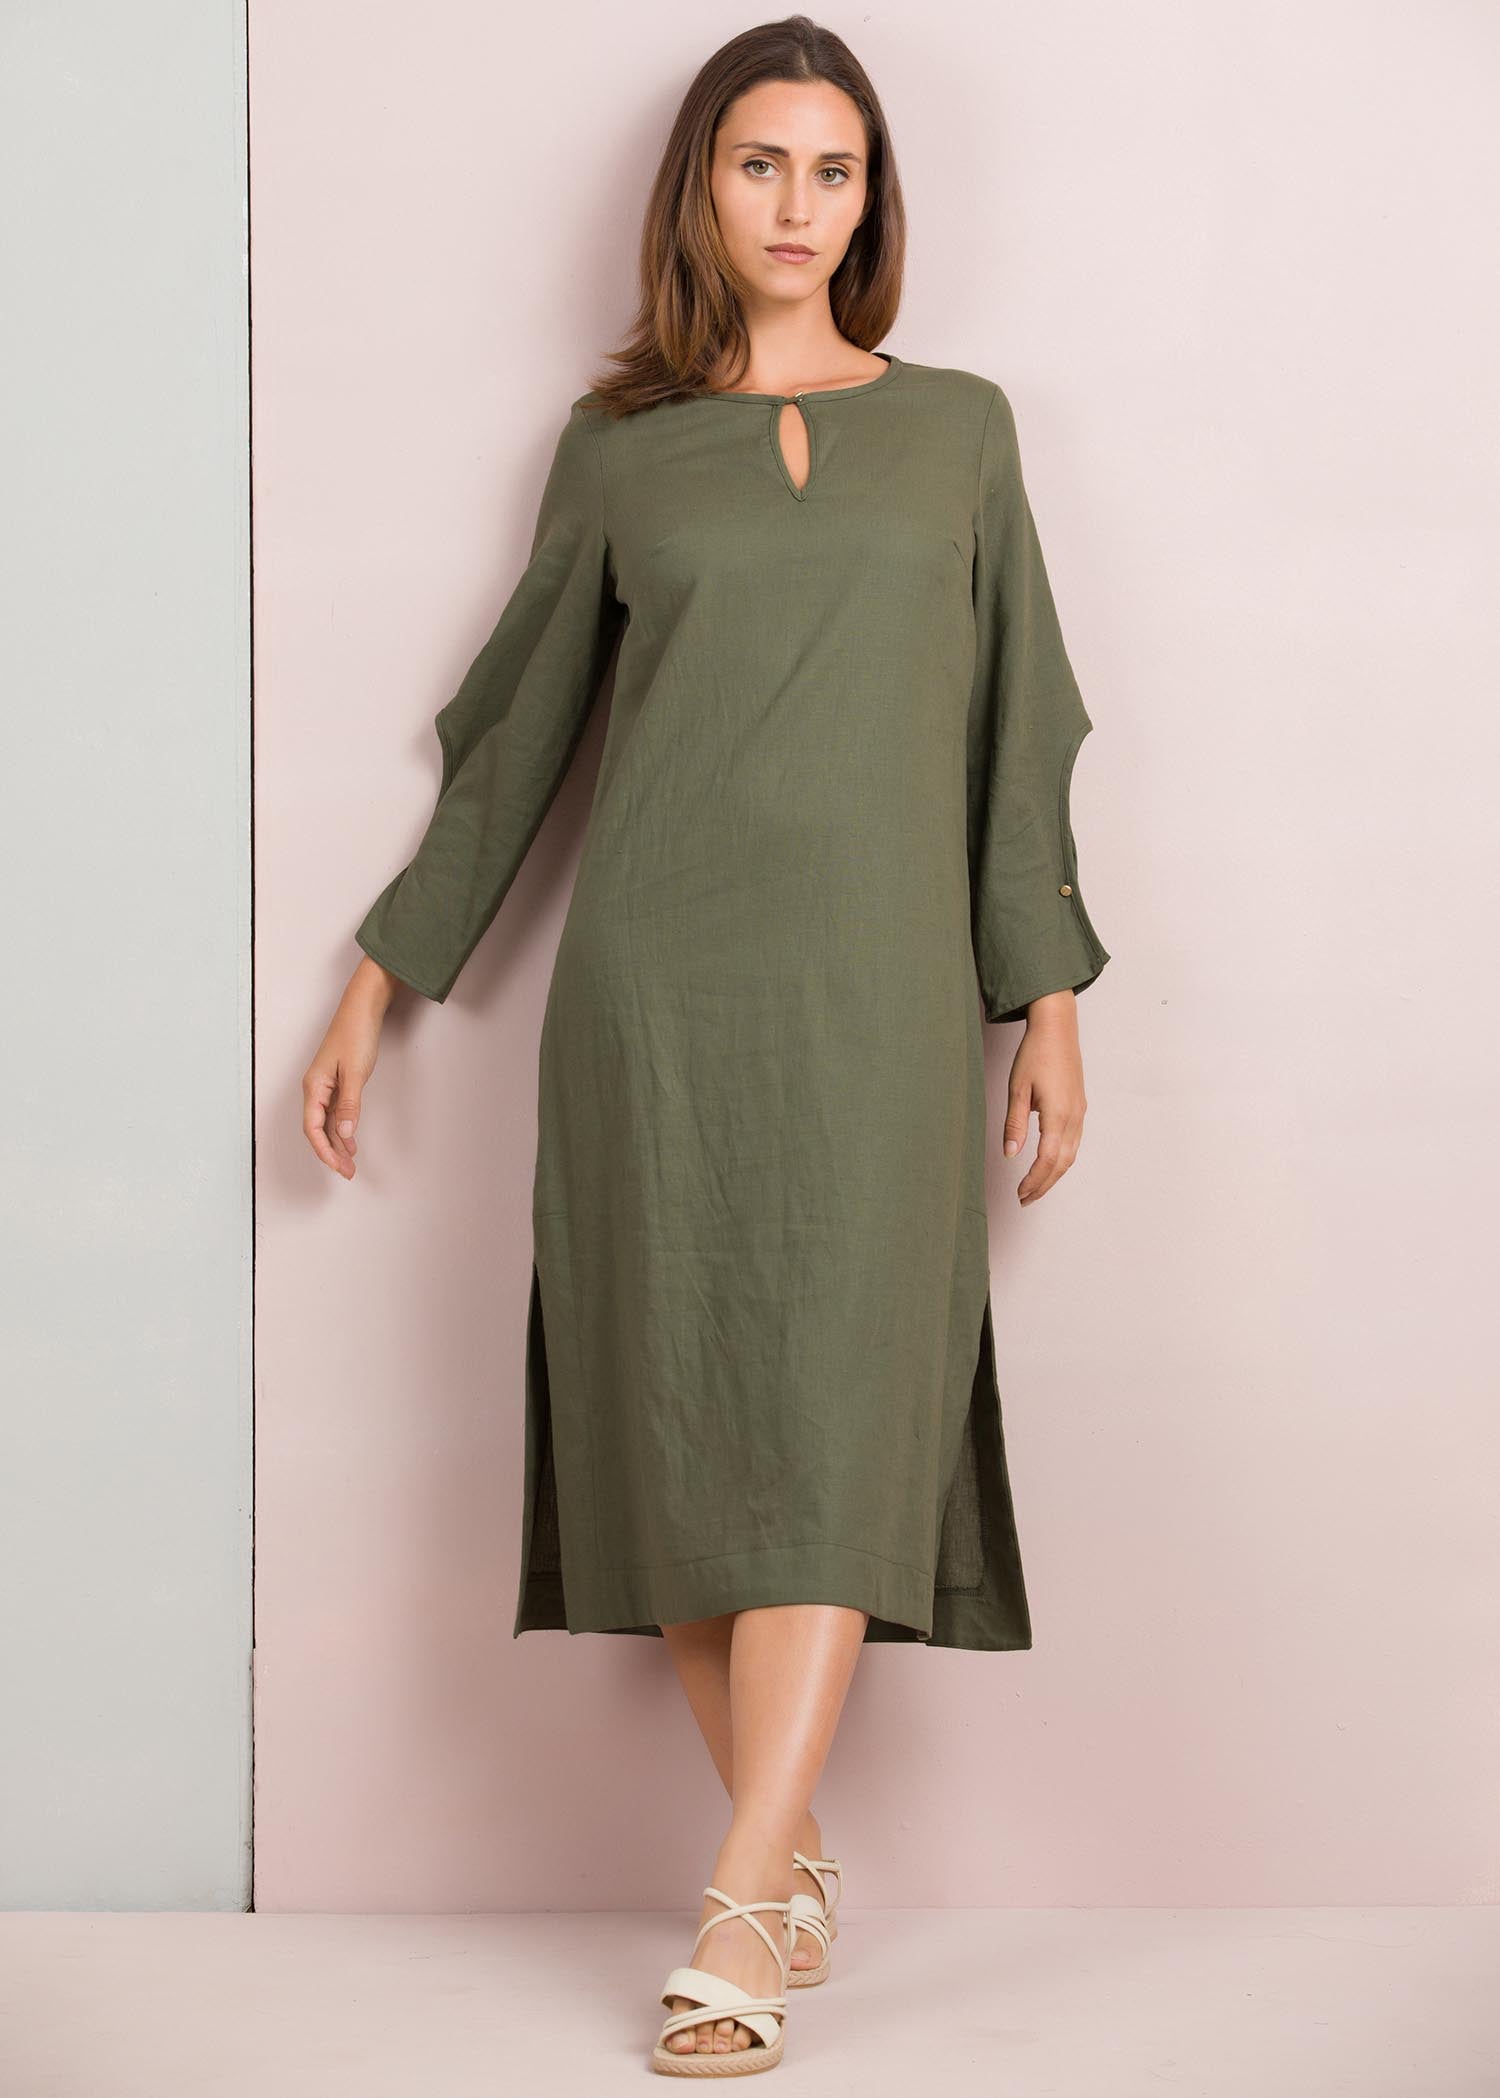 Round neck dress with sleeve cut-out